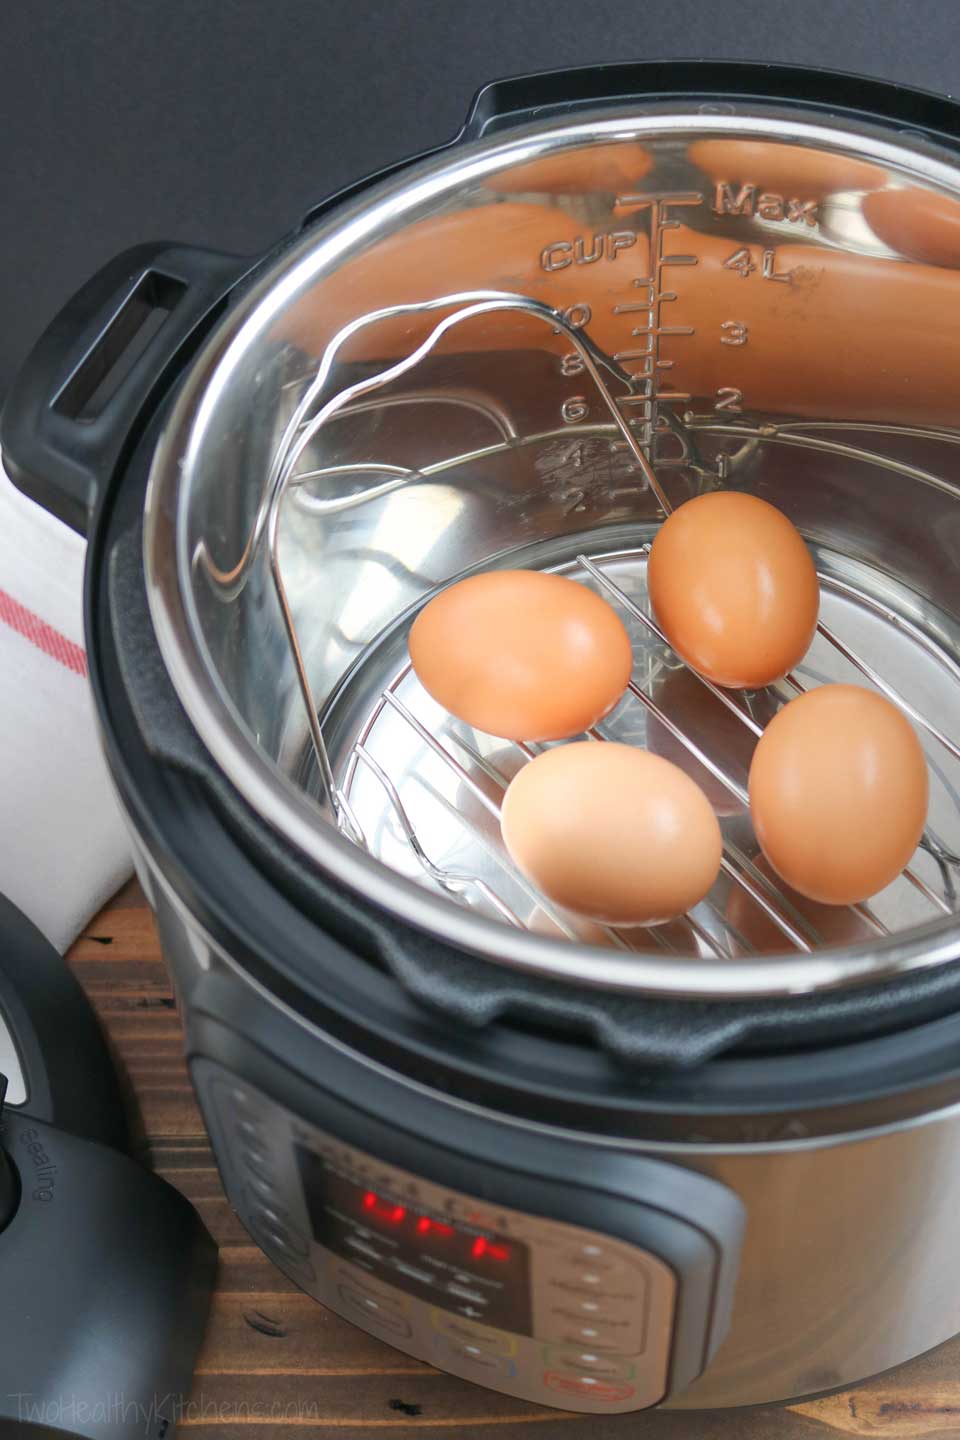 Want perfect hard-cooked eggs that are consistently easy to peel? Try making eggs in the Instant Pot! Quick and easy! In this post, we look at lots of different things you can do with an Instant Pot electric pressure cooker – and also some things you really can’t. Might help you decide if you want to buy one, or help you branch out to try new recipes you might not have thought of before! | #InstantPot #eggs #hardboiledeggs #pressurecooker #pressurecooking | www.TwoHealthyKitchens.com